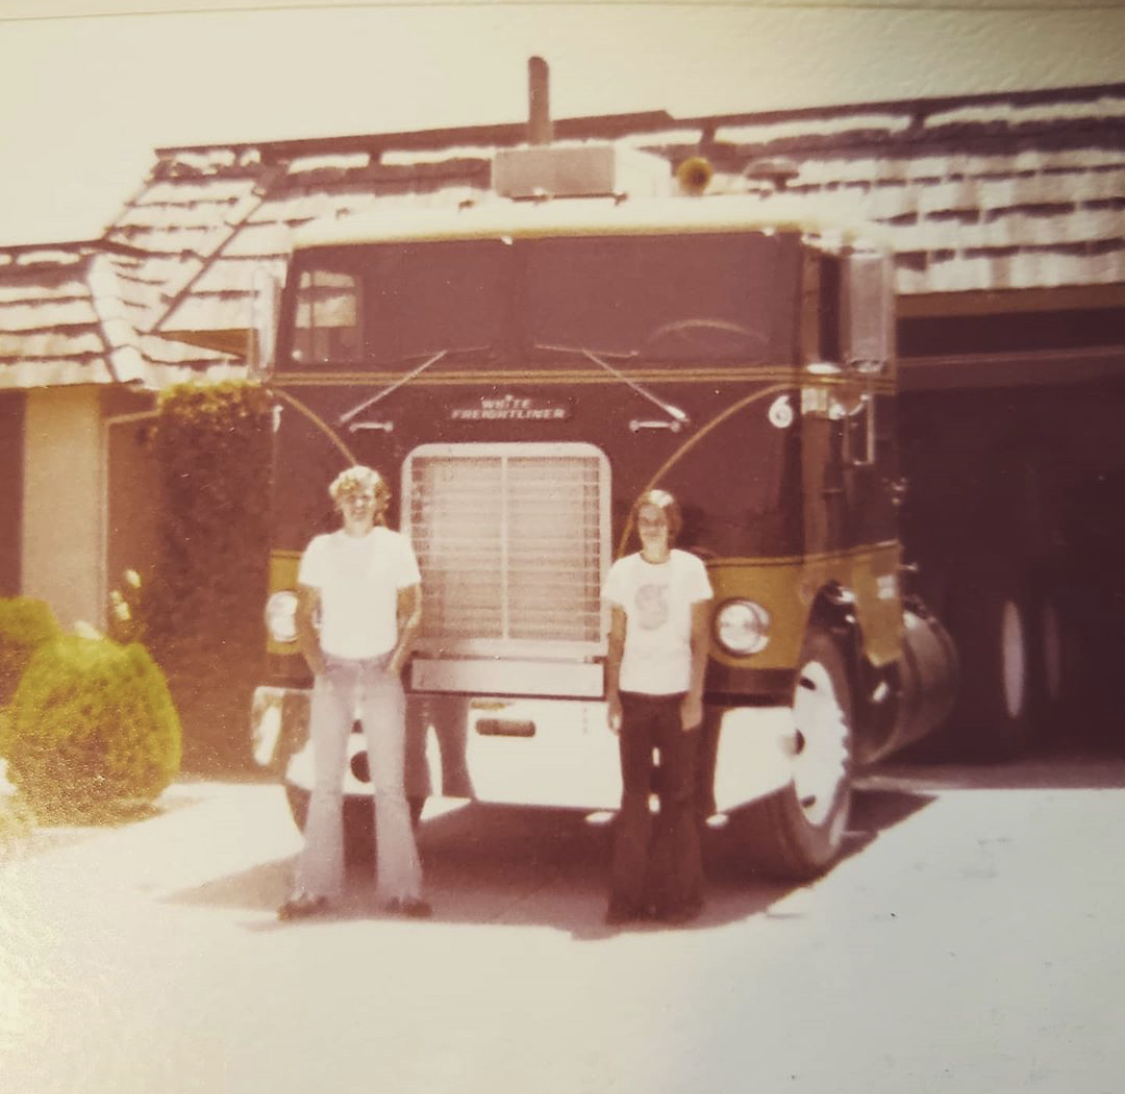 A #TBT to a #WhiteFreightliner COE that didn't quite fit in the garage. 😜 Source: Instagram krimzuhn